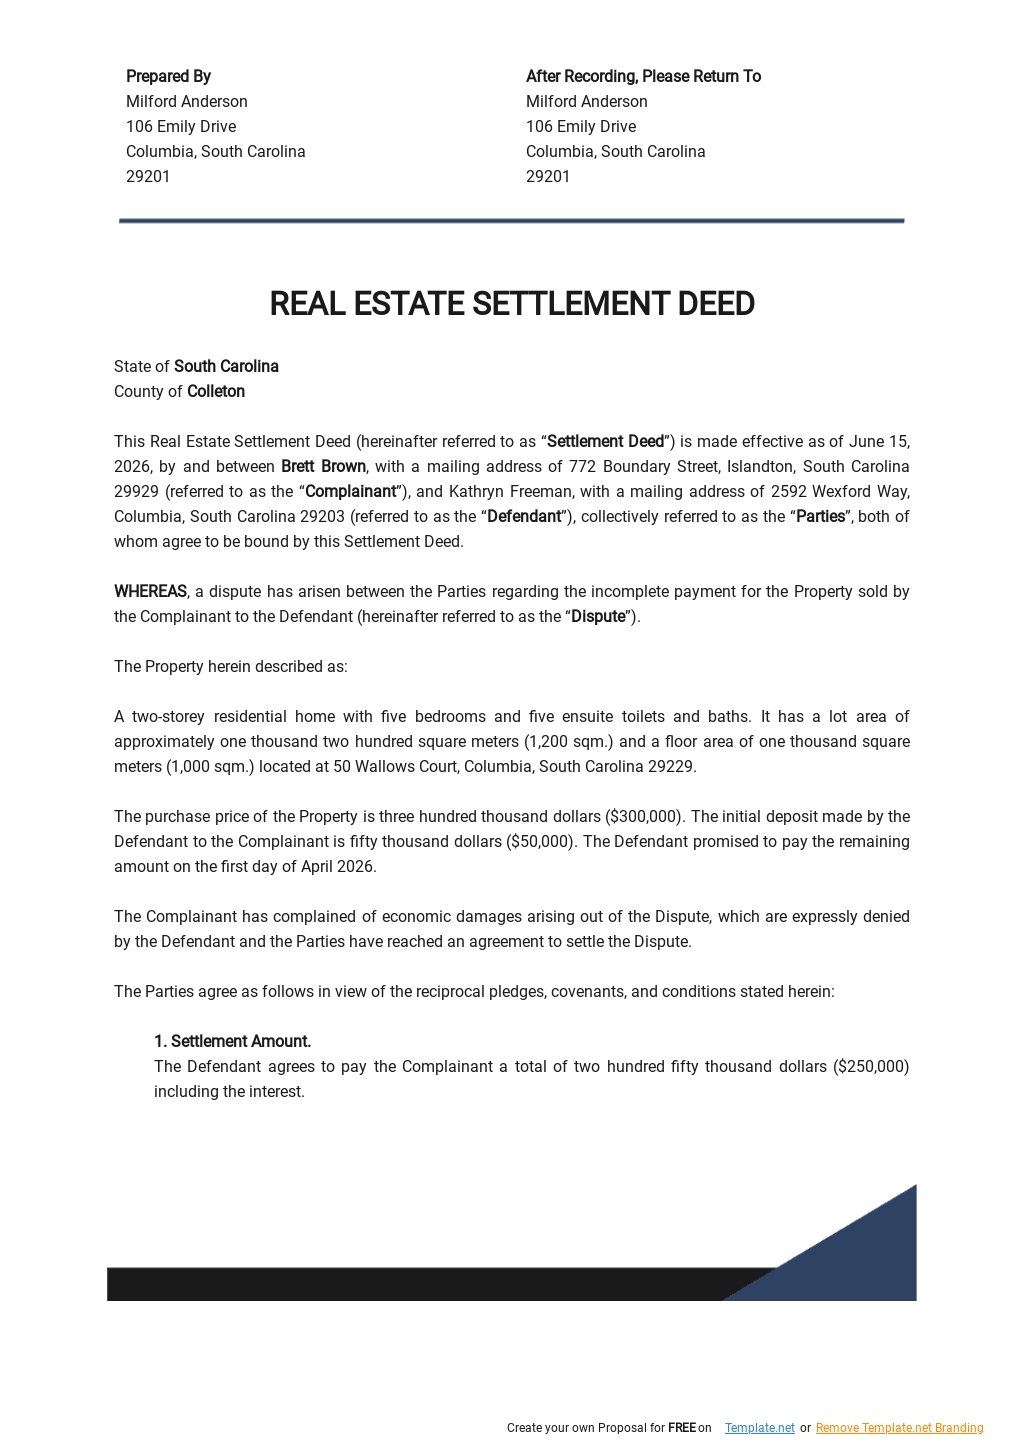 Real Estate Settlement Deed Template 